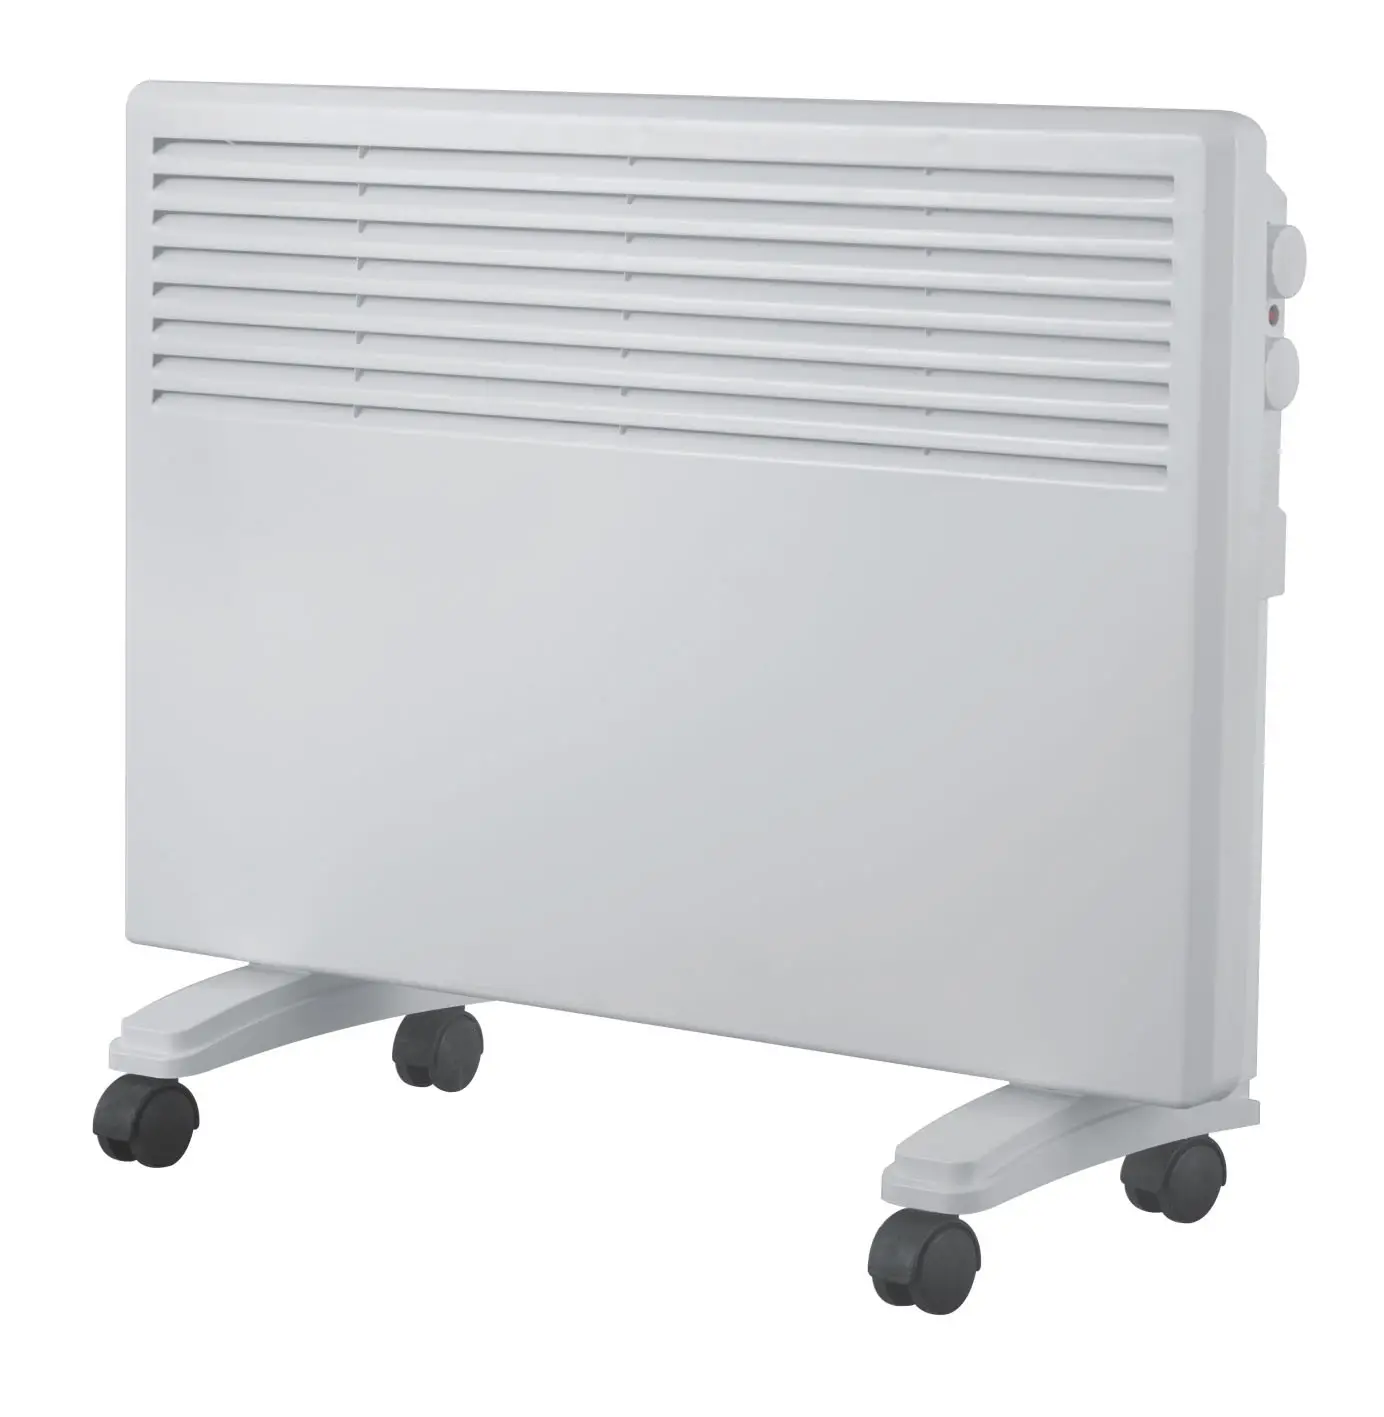 PN1000W Cast Iron Electric Convection Heater 1500W-2000W Portable and Wall Mounted for Home Use with Ventilation Function